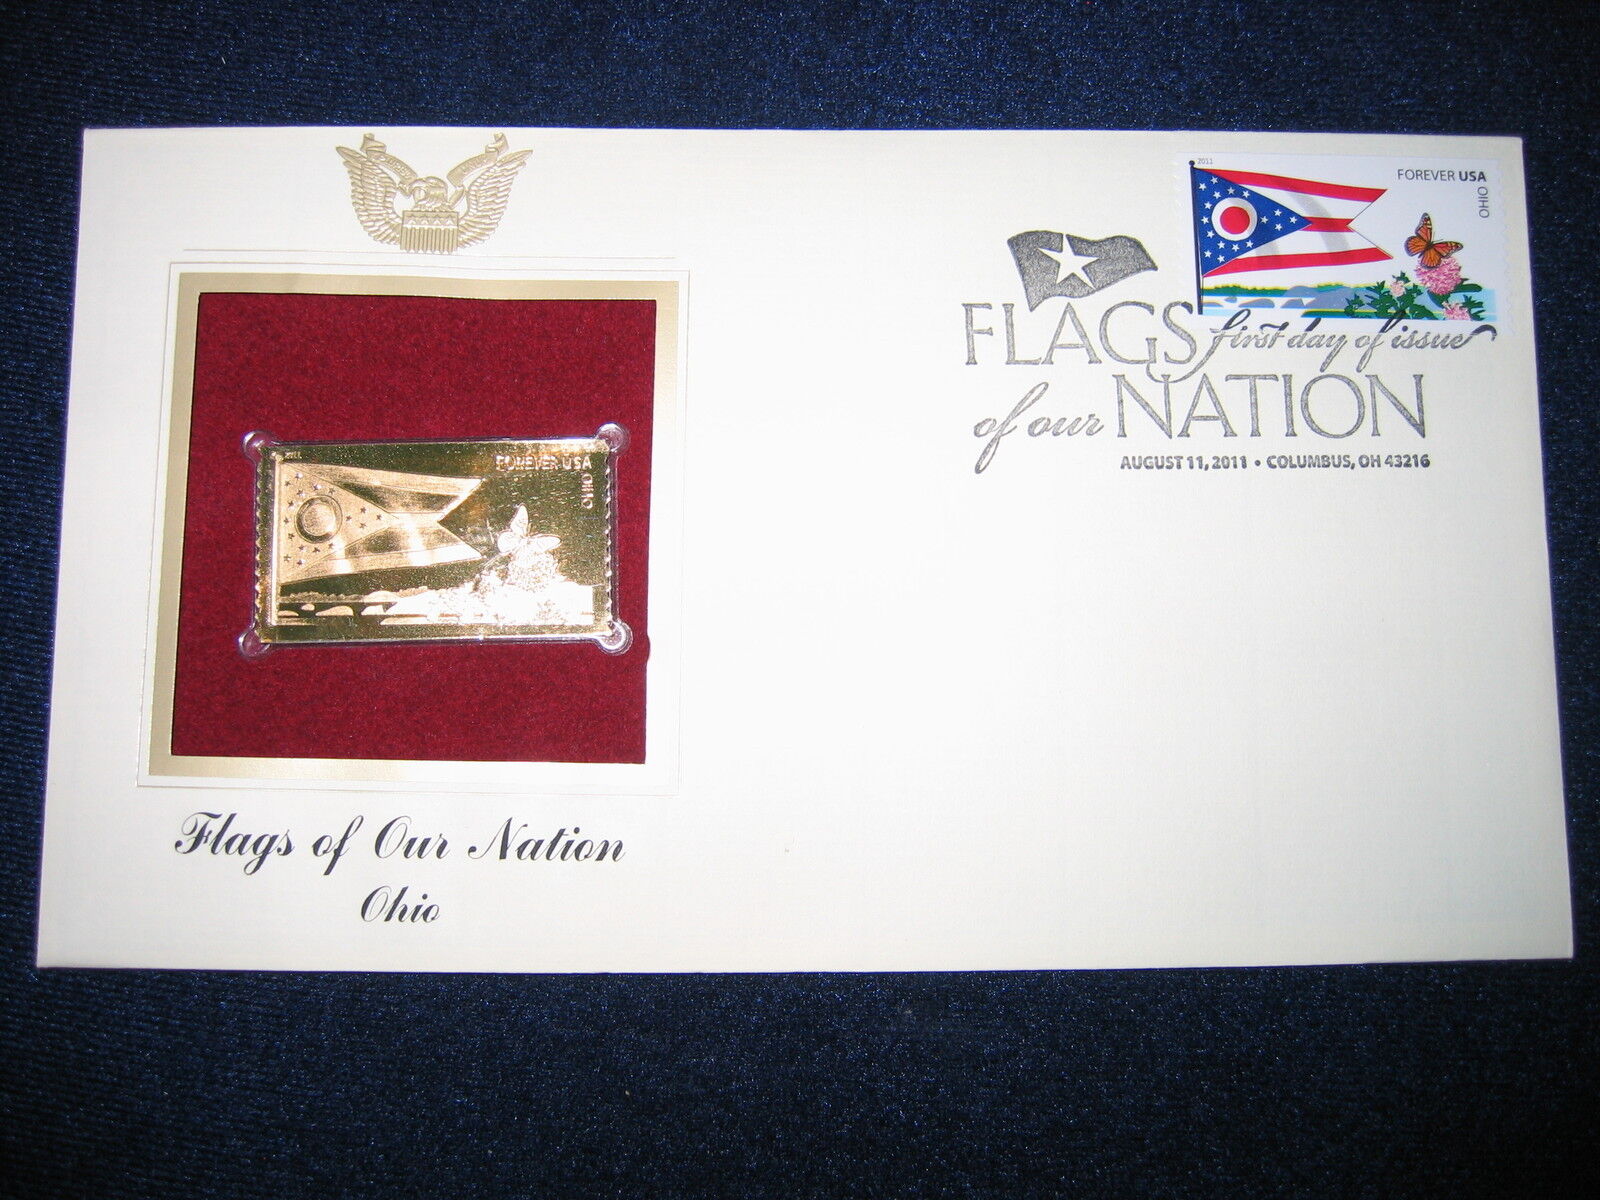 2008 Flags of our Nation Ohio Cover Gold FDC Replica 新しいスタイル 22kt Golden 激安特価品